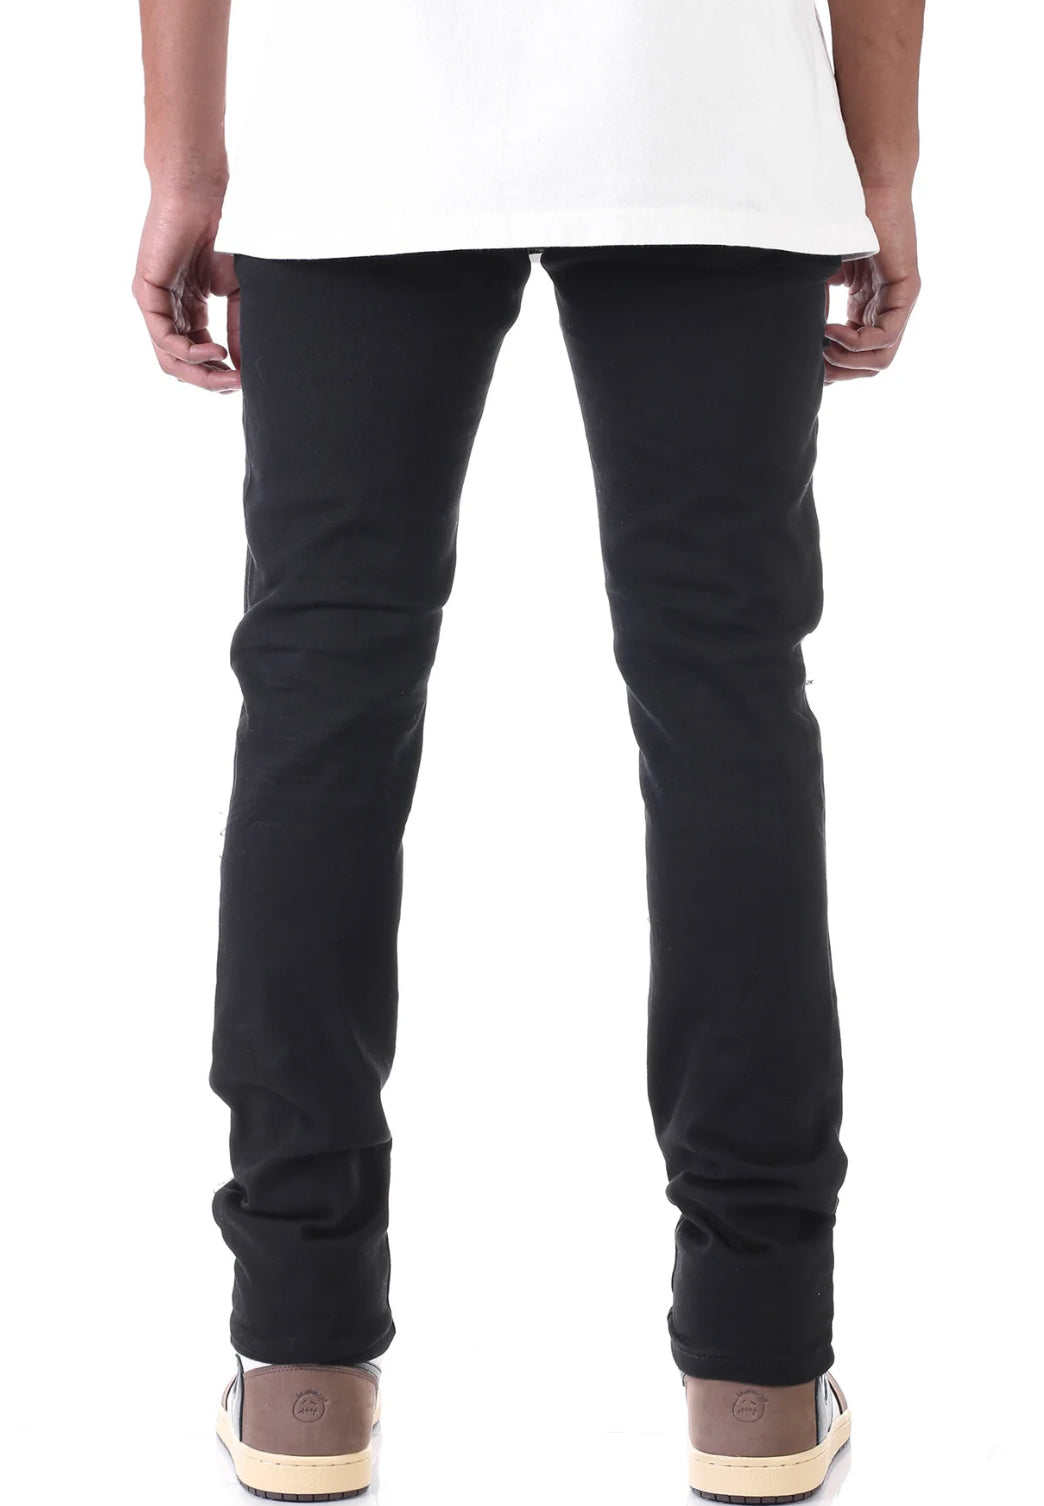 “NEW” KDNK Under Patched Skinny Pants (Black)